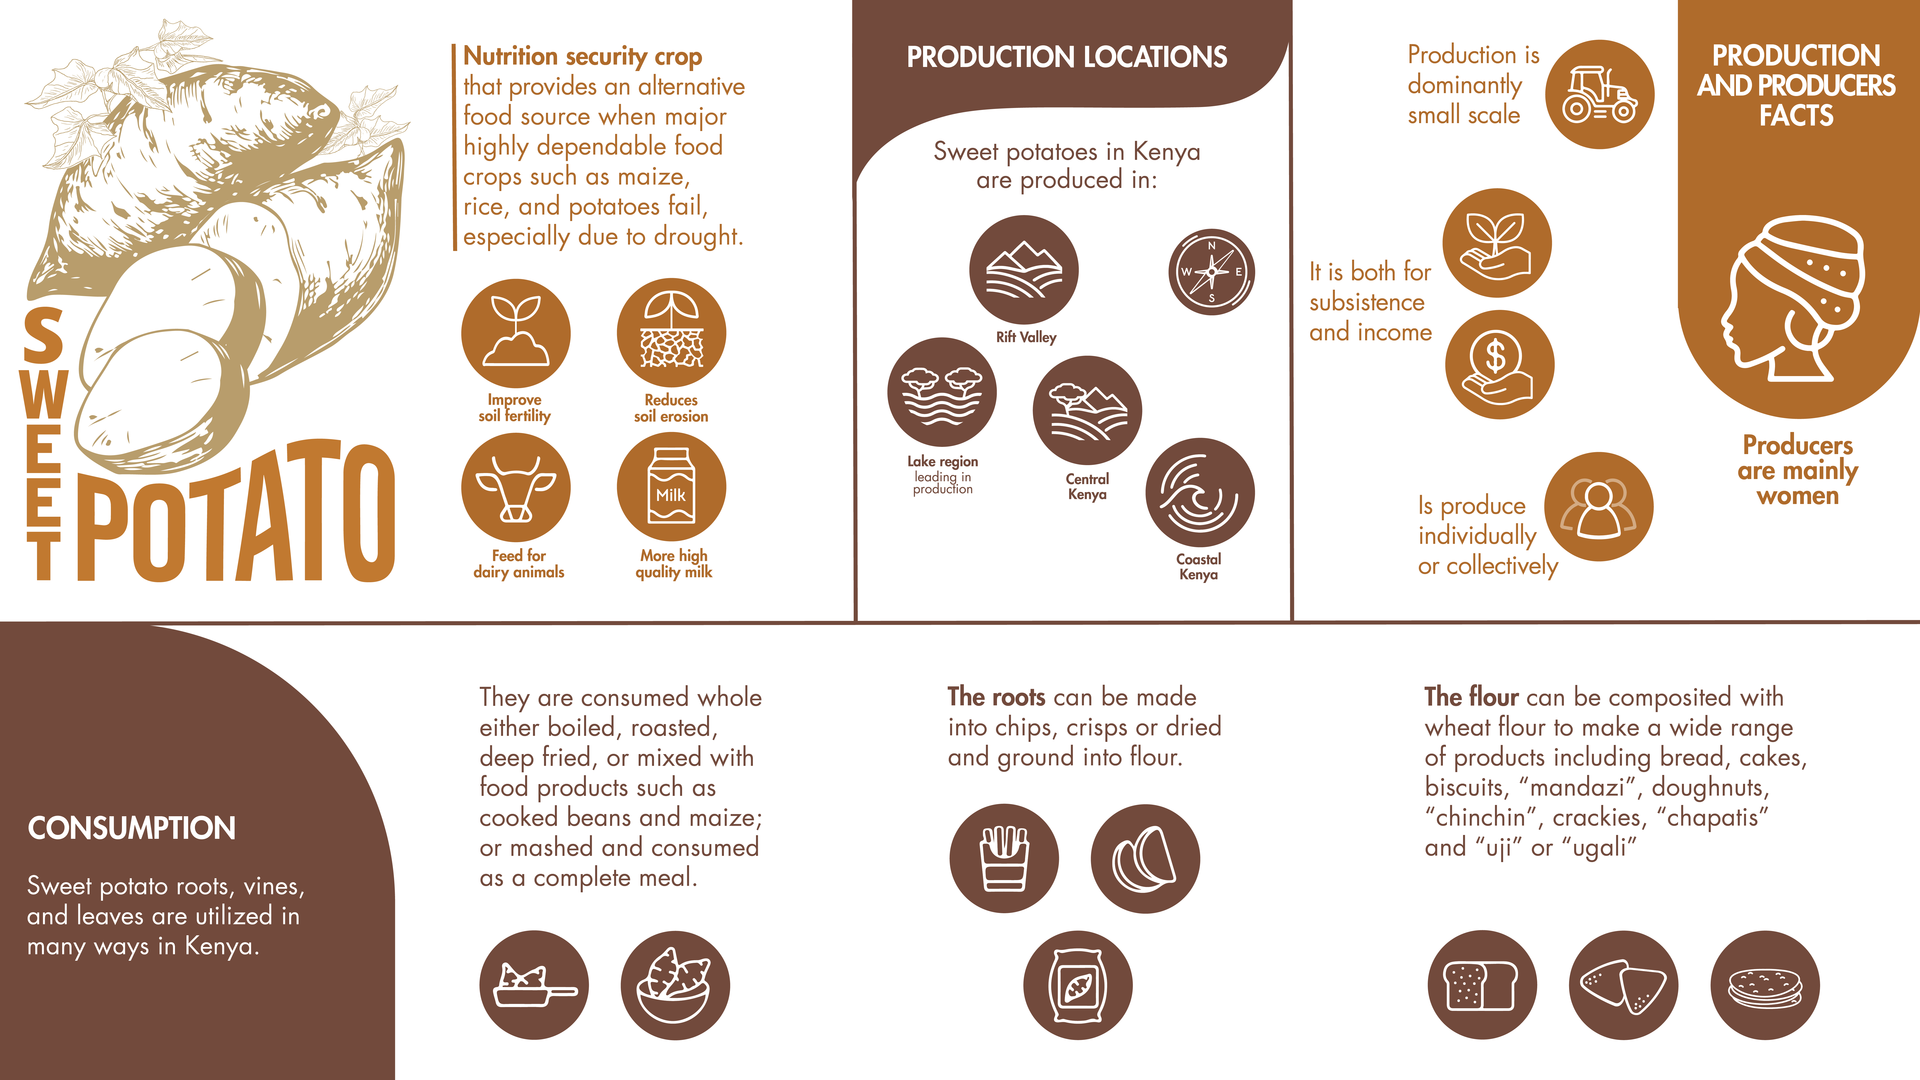 Figure 1. Sweet potato benefits, production locations, facts and consumption in Kenya.